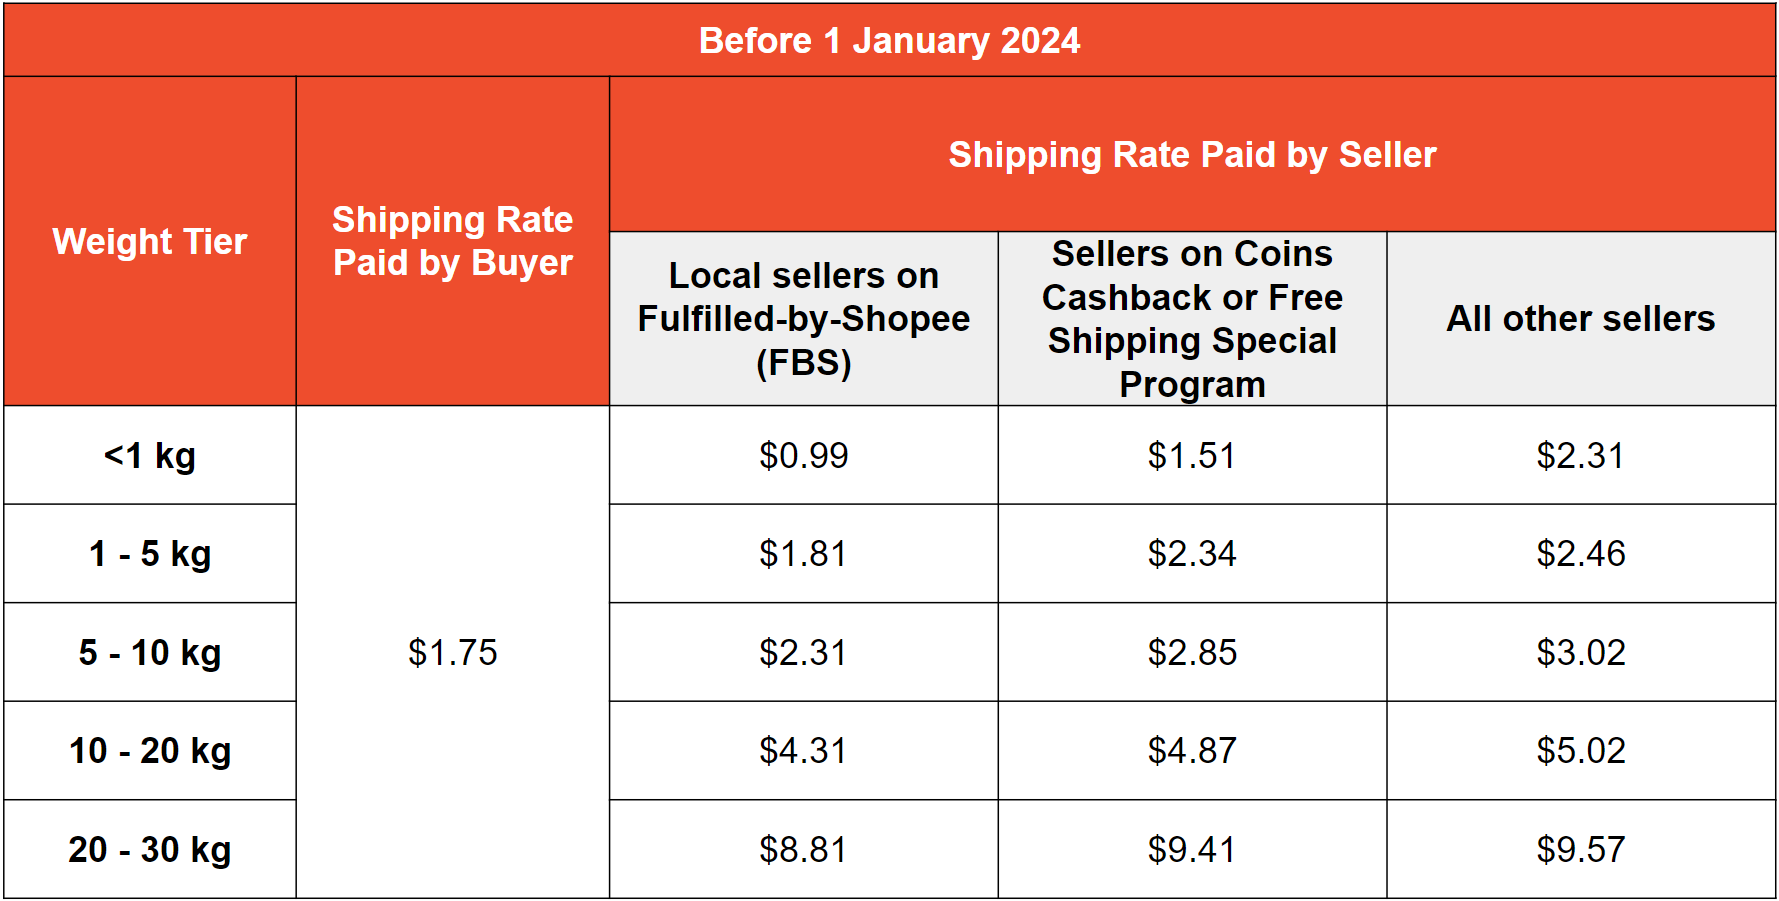 J&T Shipping Fee Rates & Transparency, Announcements on Carousell